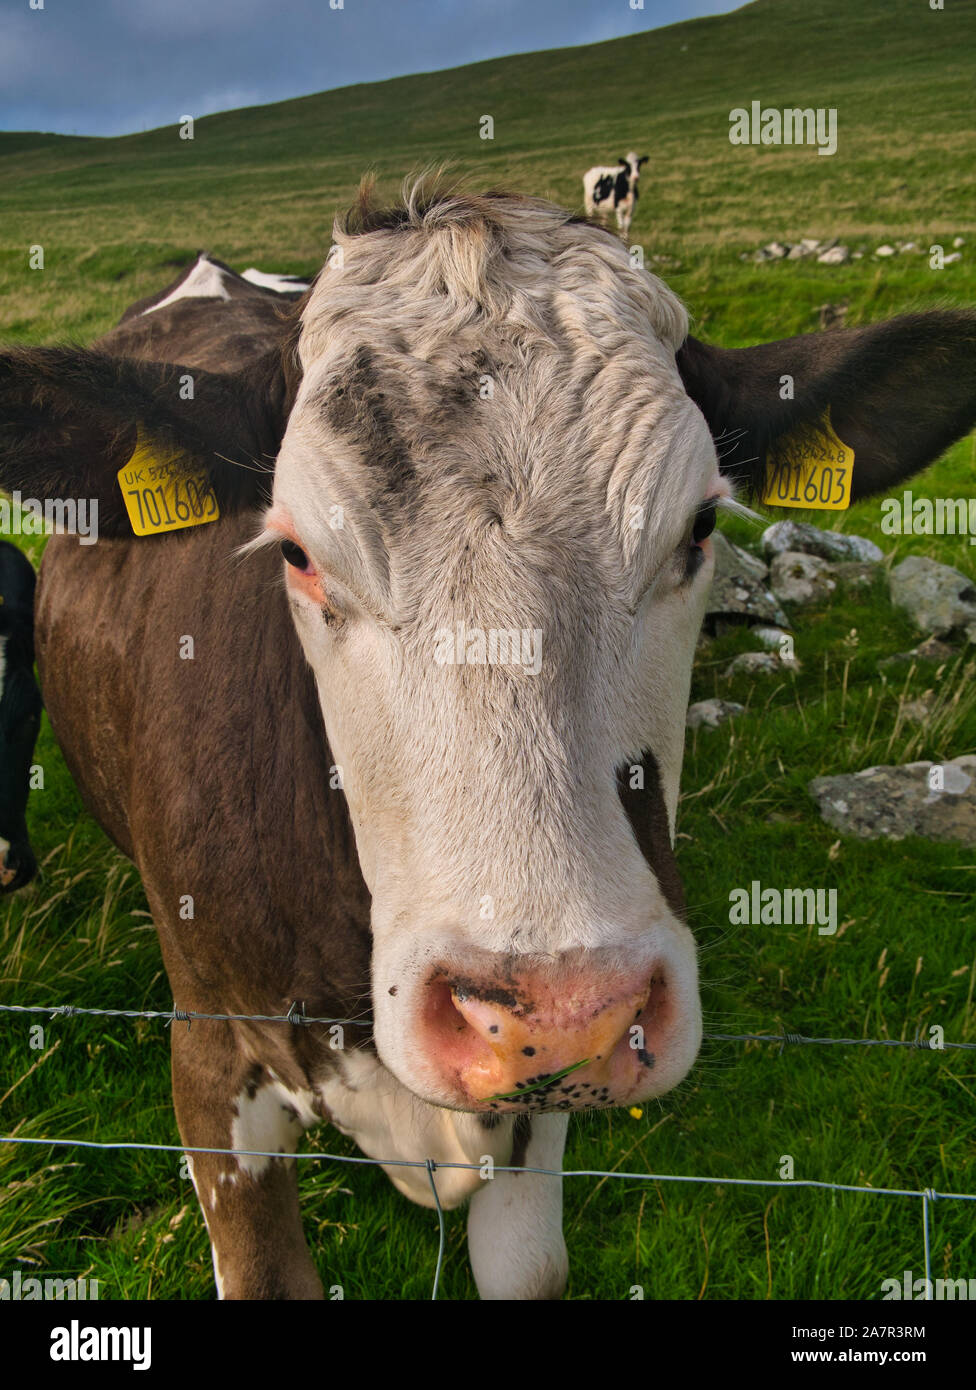 A close up of an Ayrshire breed dairy cow in a field in Shetland, Scotland, UK Stock Photo